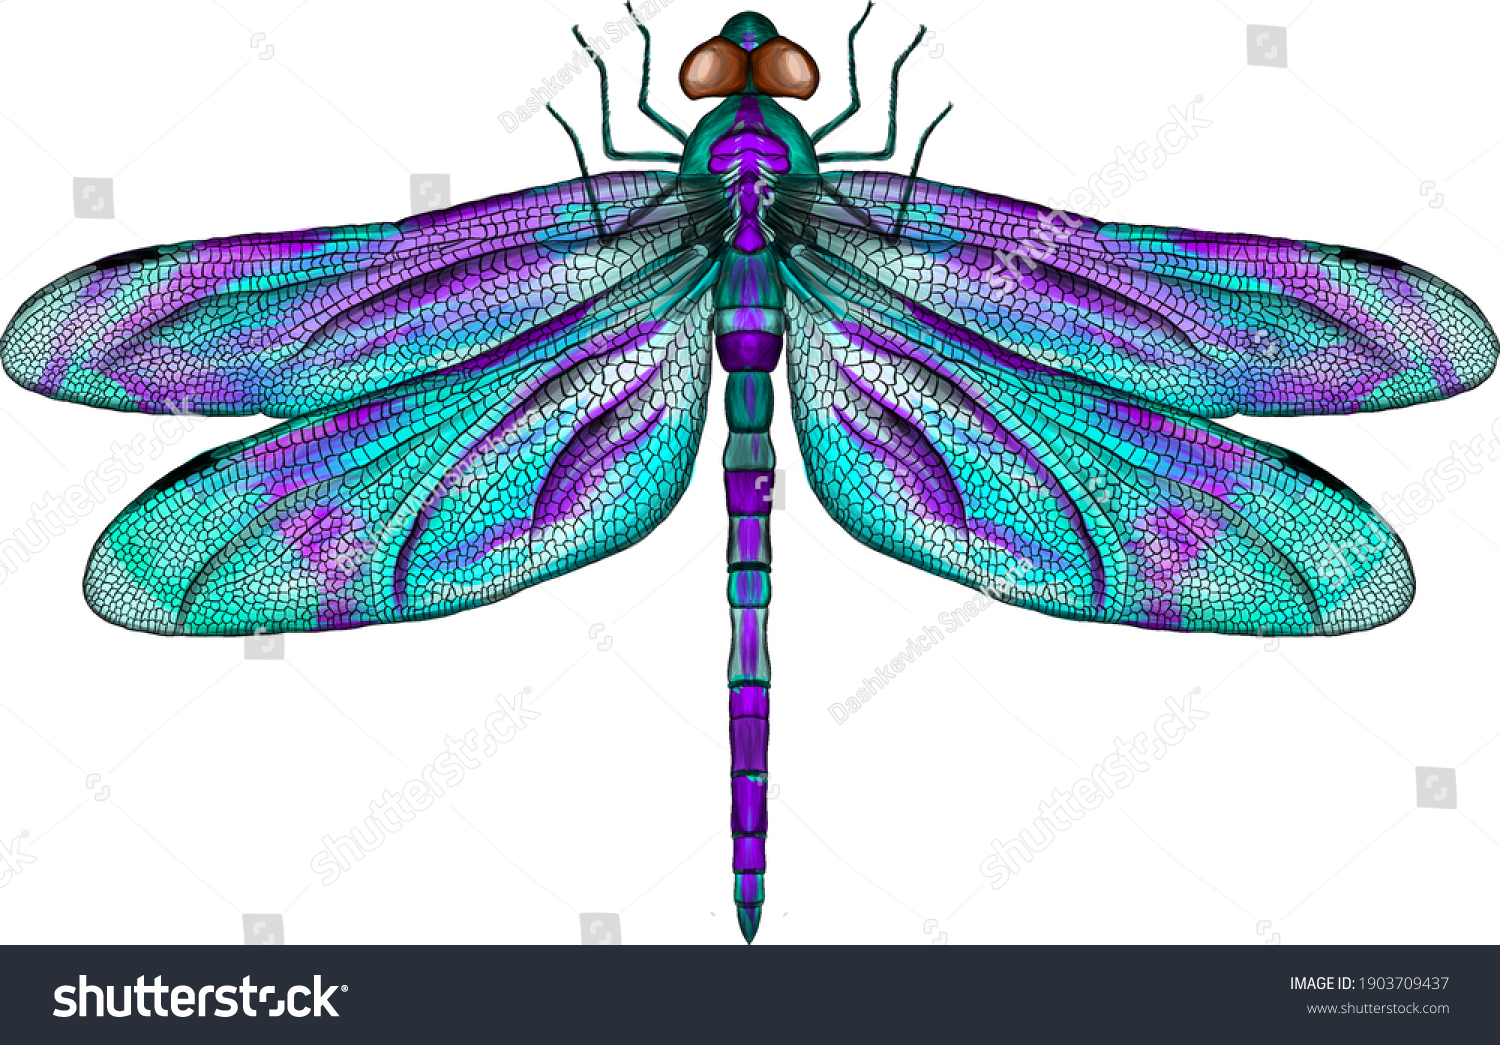 purple and blue dragonfly with delicate wings vector illustration #1903709437